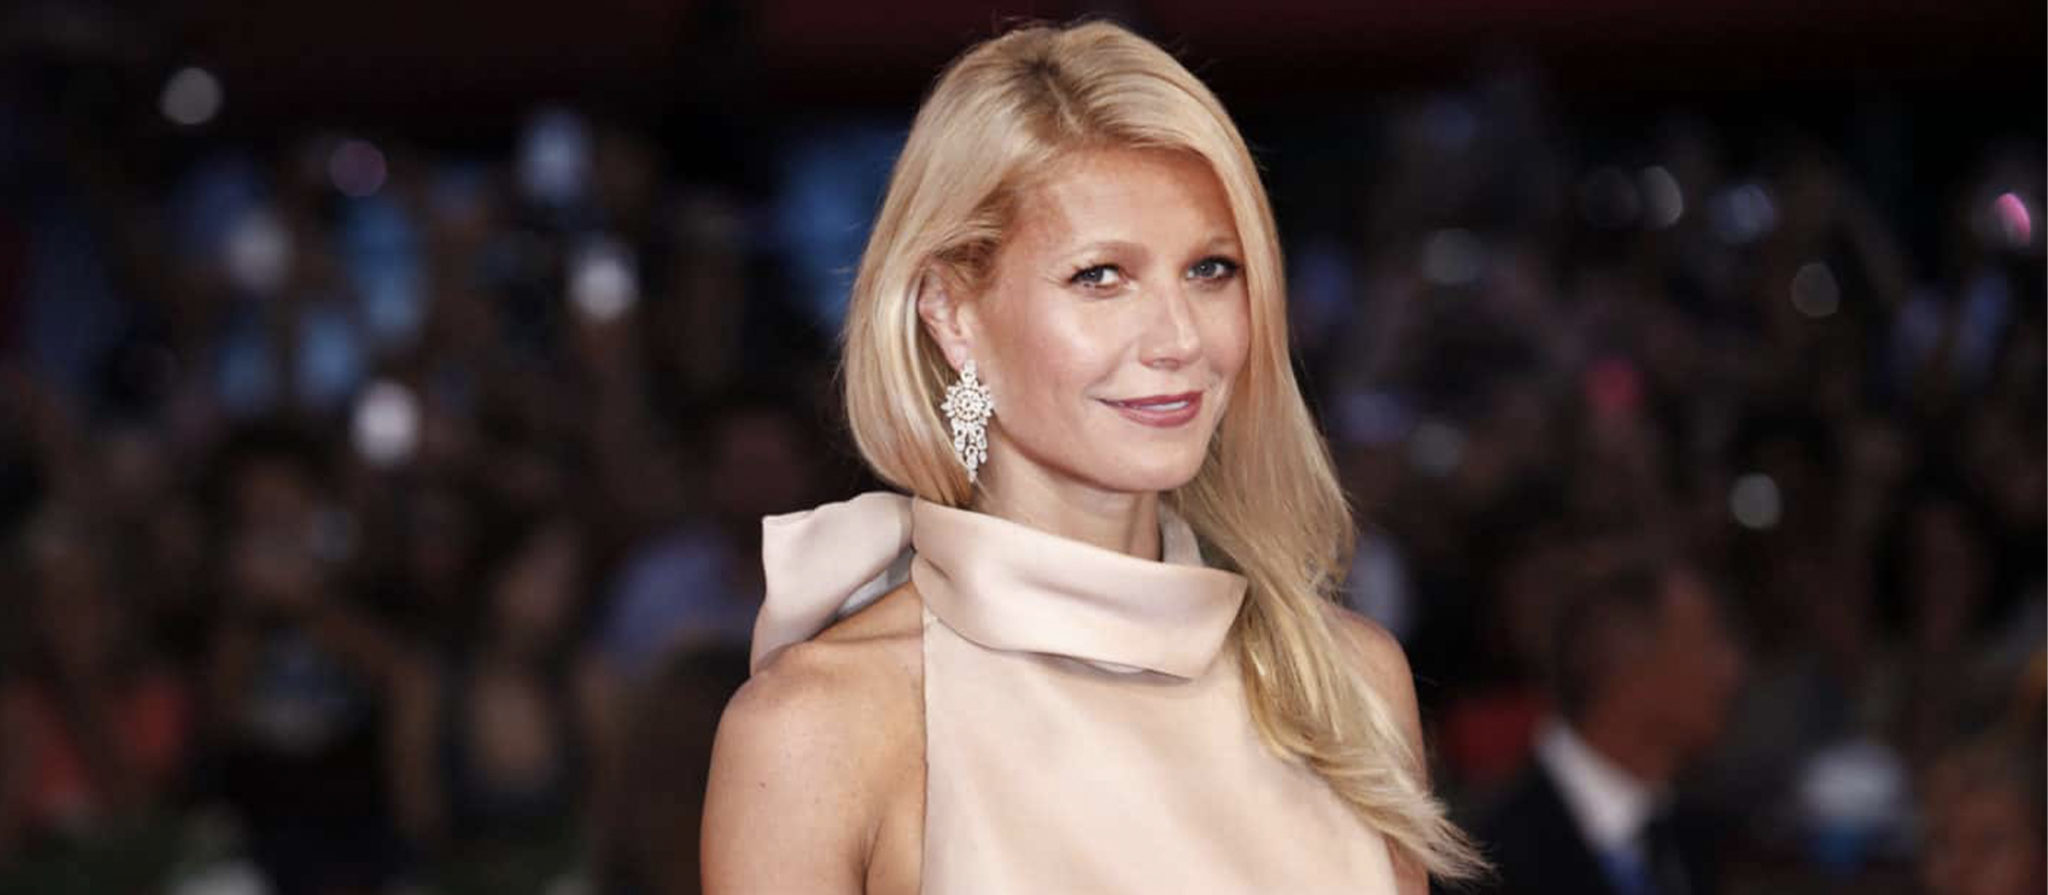 <p>Anderson’s commitment to retro-chic is notorious. Case in point: Gwyneth Paltrow as Margot in <em>The Royal Tenenbaums</em> actually smoked a brand of darts that were only sold in Ireland and discontinued in the 1970s. Anderson insisted finding this obscure brand because it fit the film’s 70s vibe and made Margot’s use of them all the quirkier.</p>